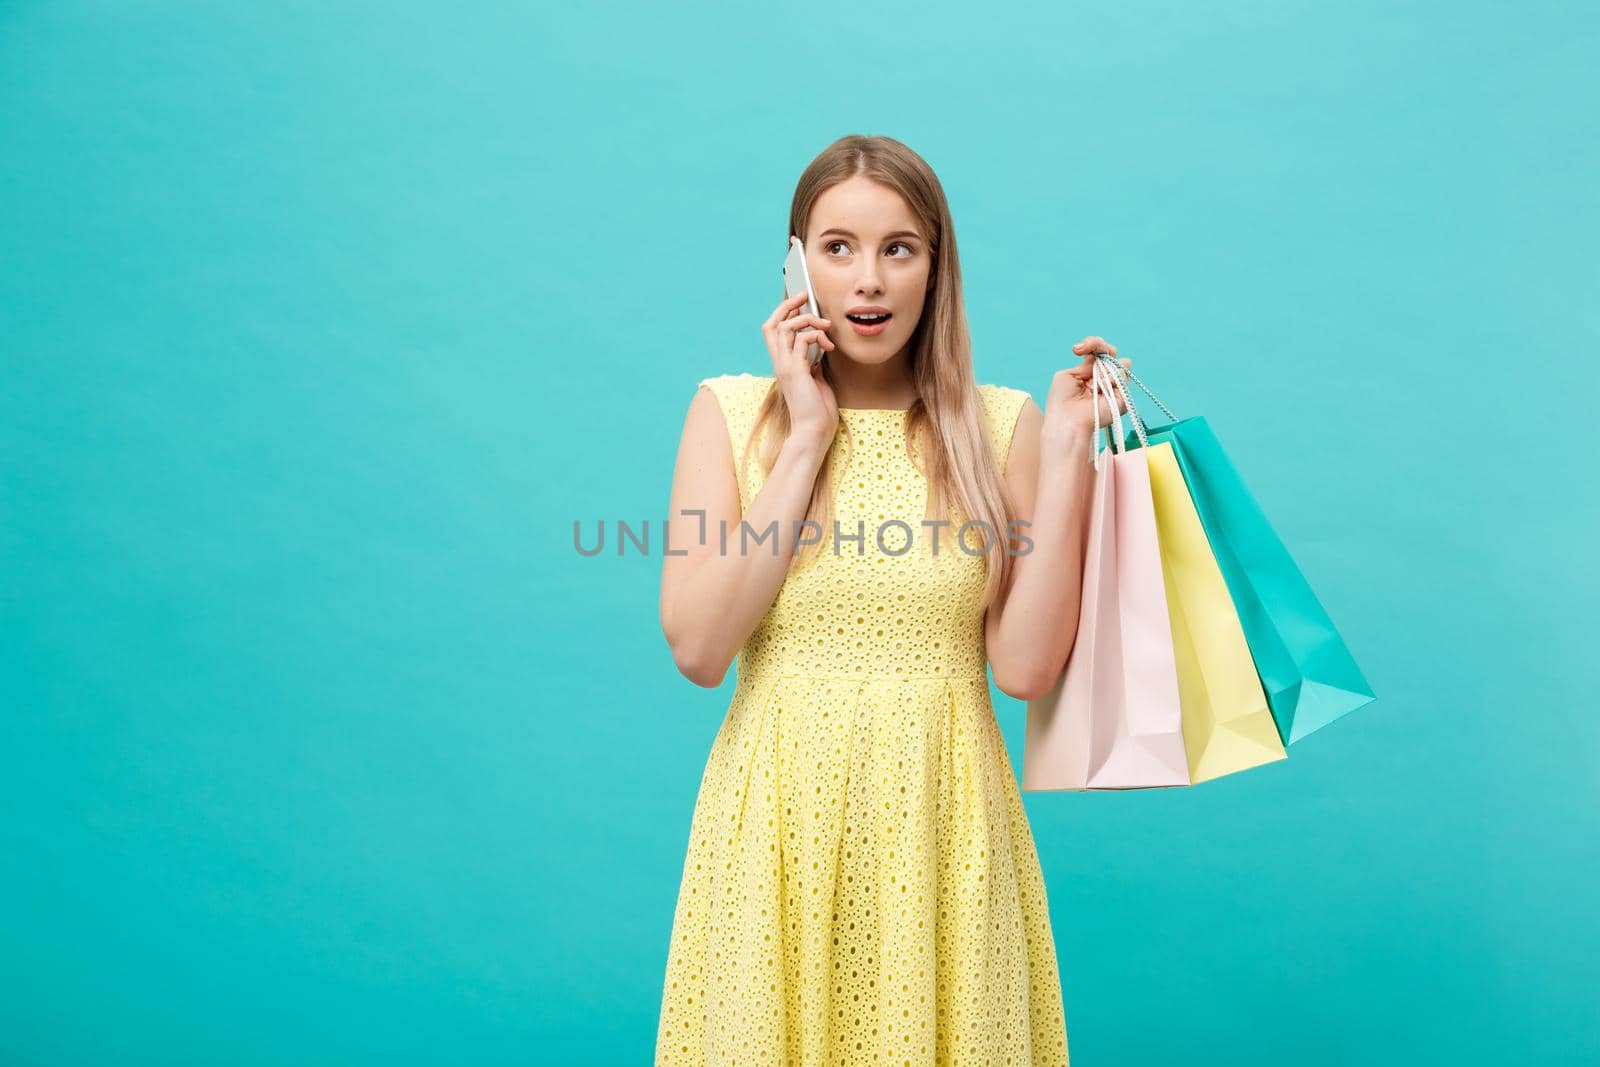 Portrait of happy fashion caucasian woman with shopping bags calling on mobile phone. Isolated on blue background